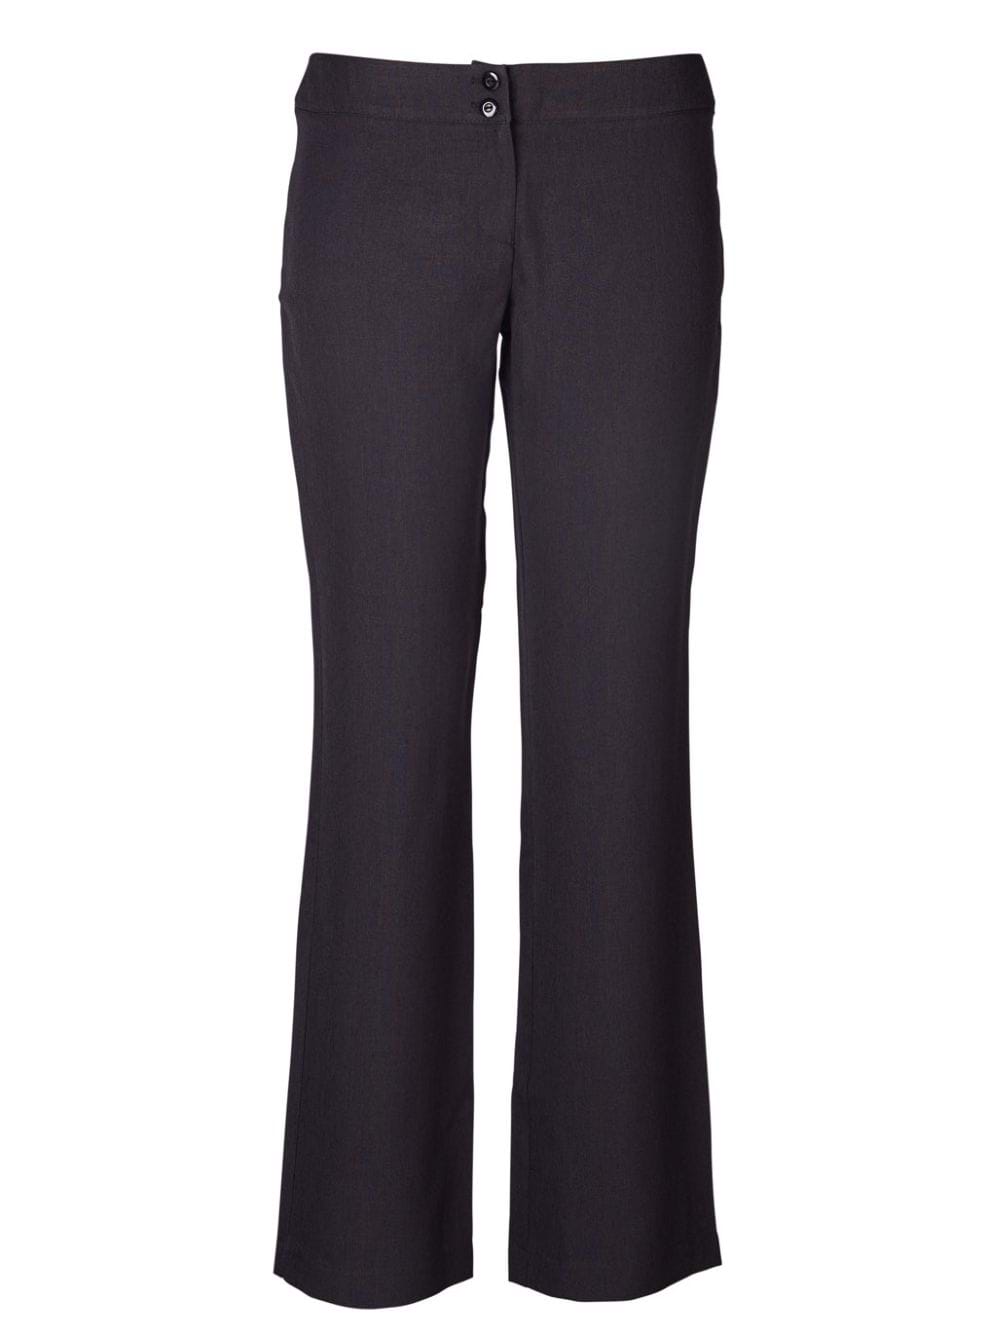 Susan Hipster Pants - Cationic Charcoal Grey / 30